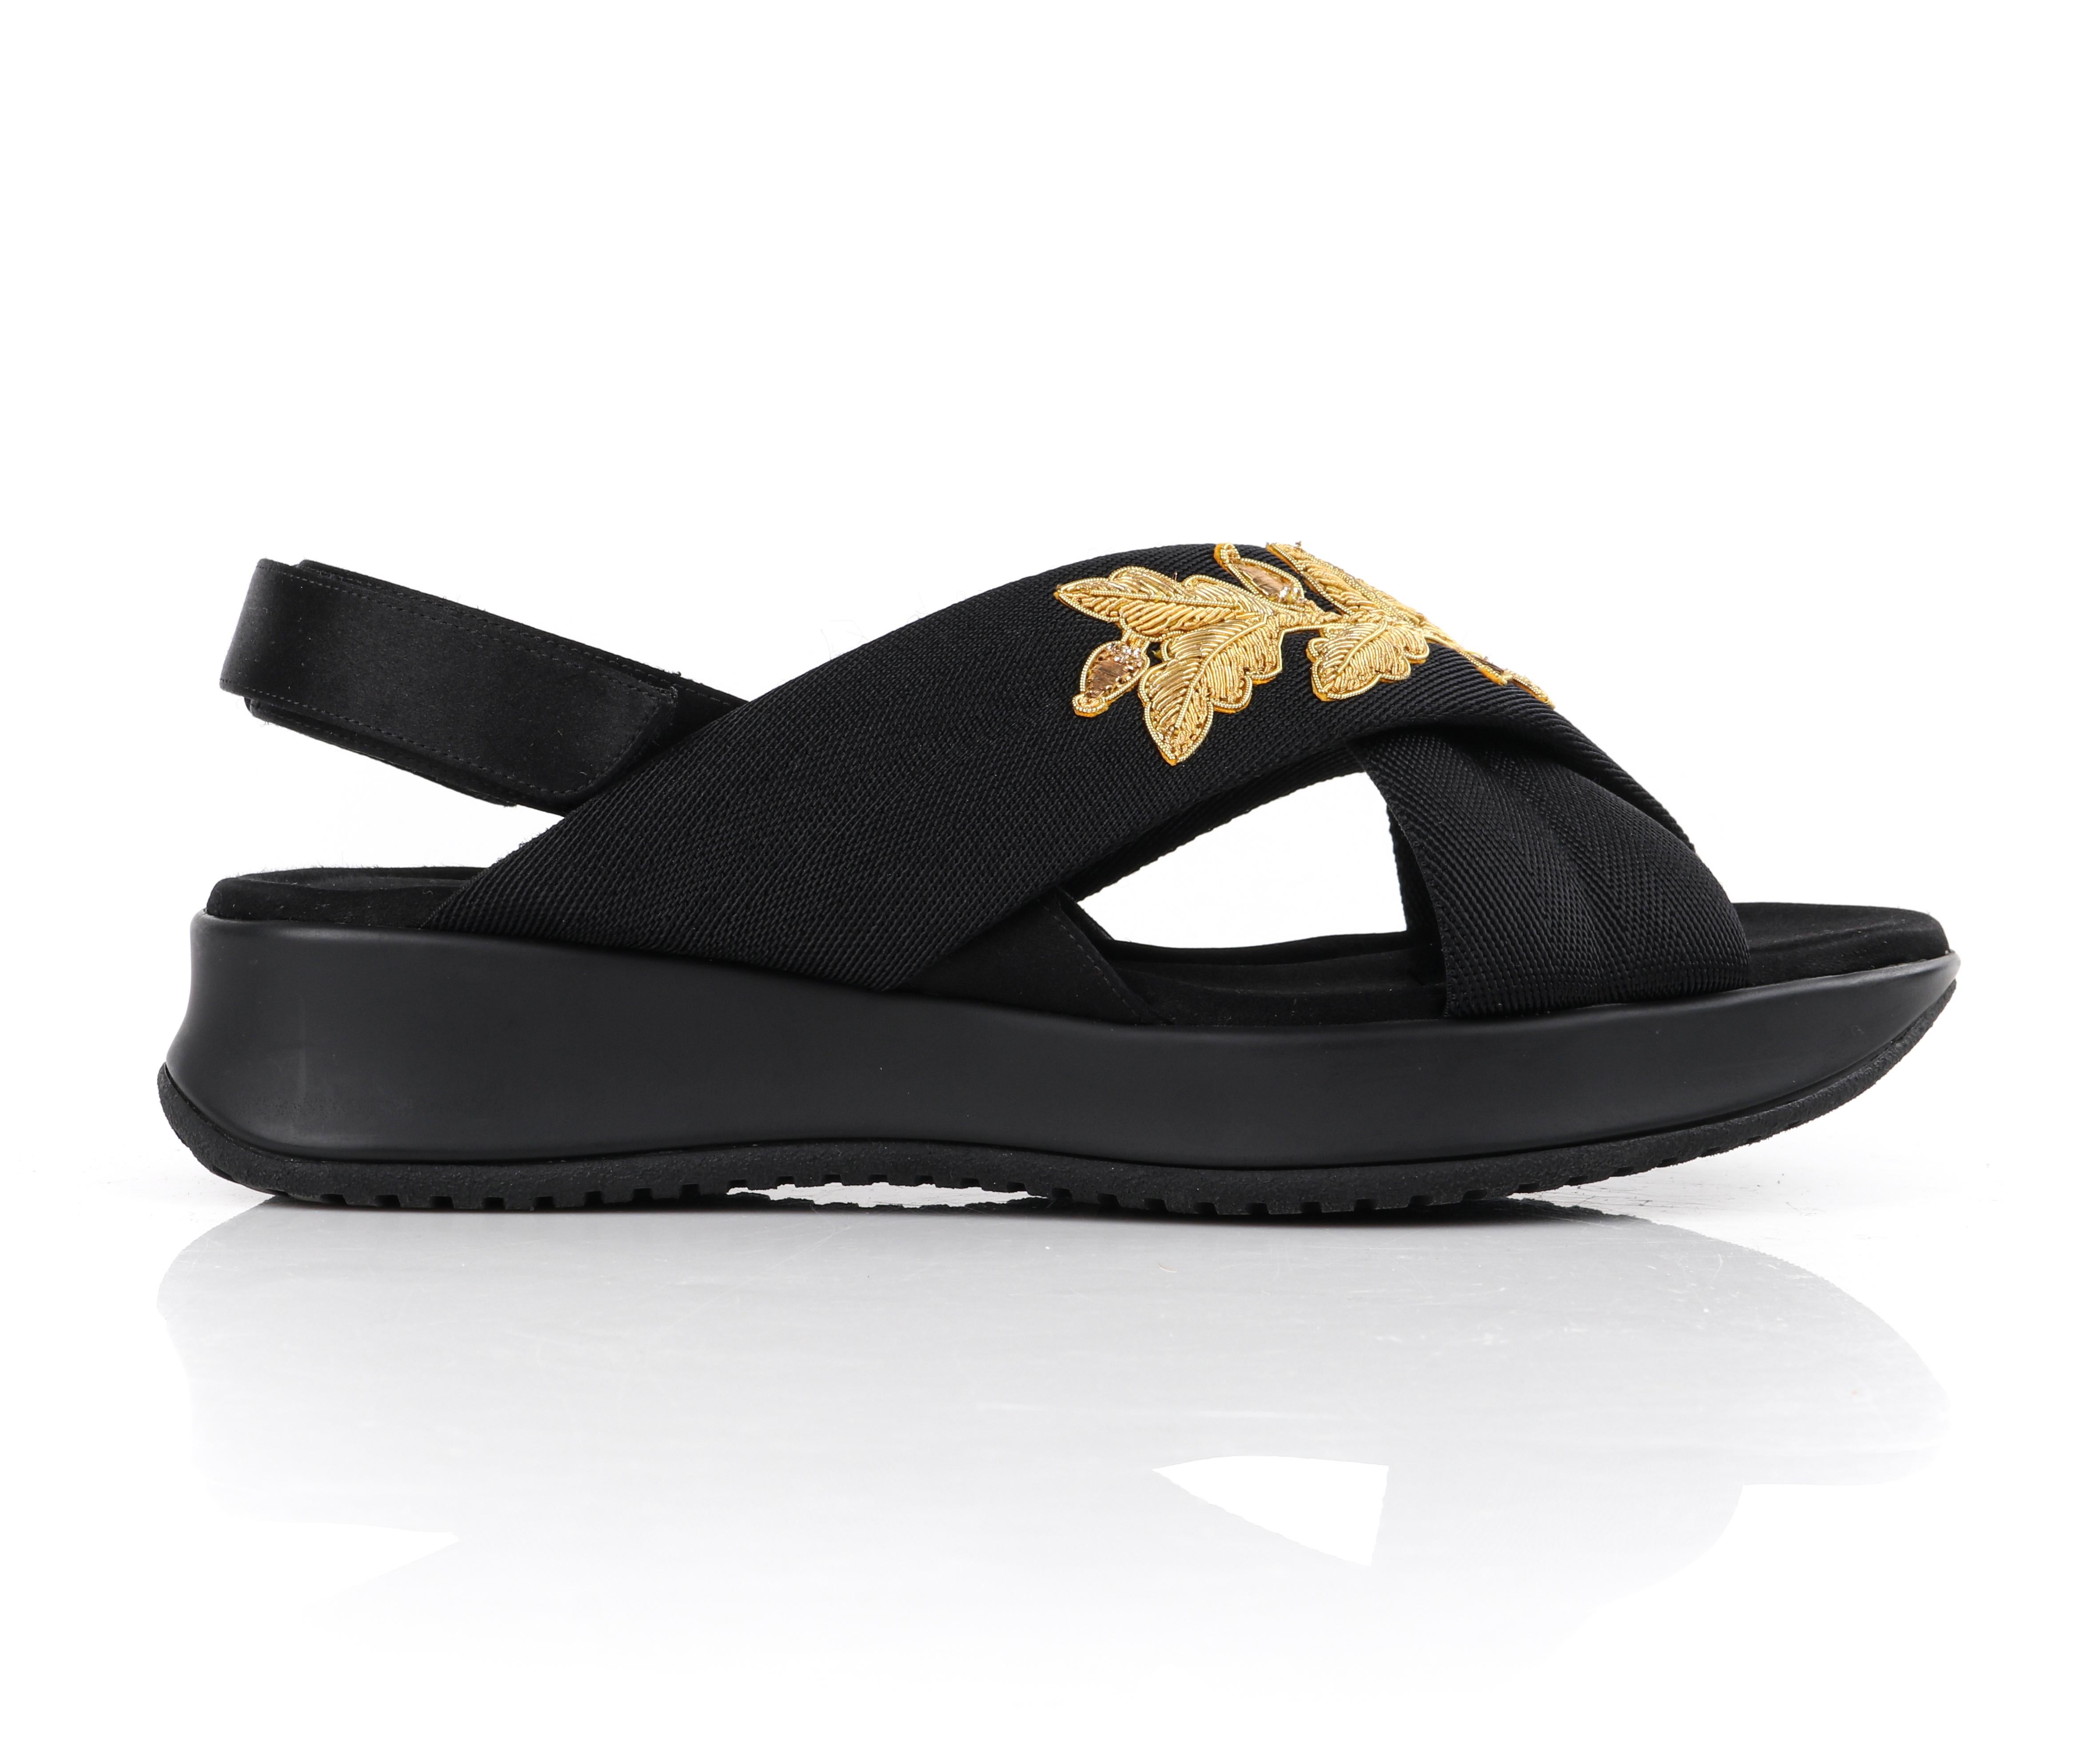 BURBERRY Prorsum S/S 2016 Criss Cross Embroidered Black Gold Adjustable Sandals
 
Brand / Manufacturer: Burberry
Collection: Burberry Prorsum S/S 2016
Style: Sandals 
Color(s): Shades of black, gold
Lined: No
Unmarked Fabric Content (feel of):